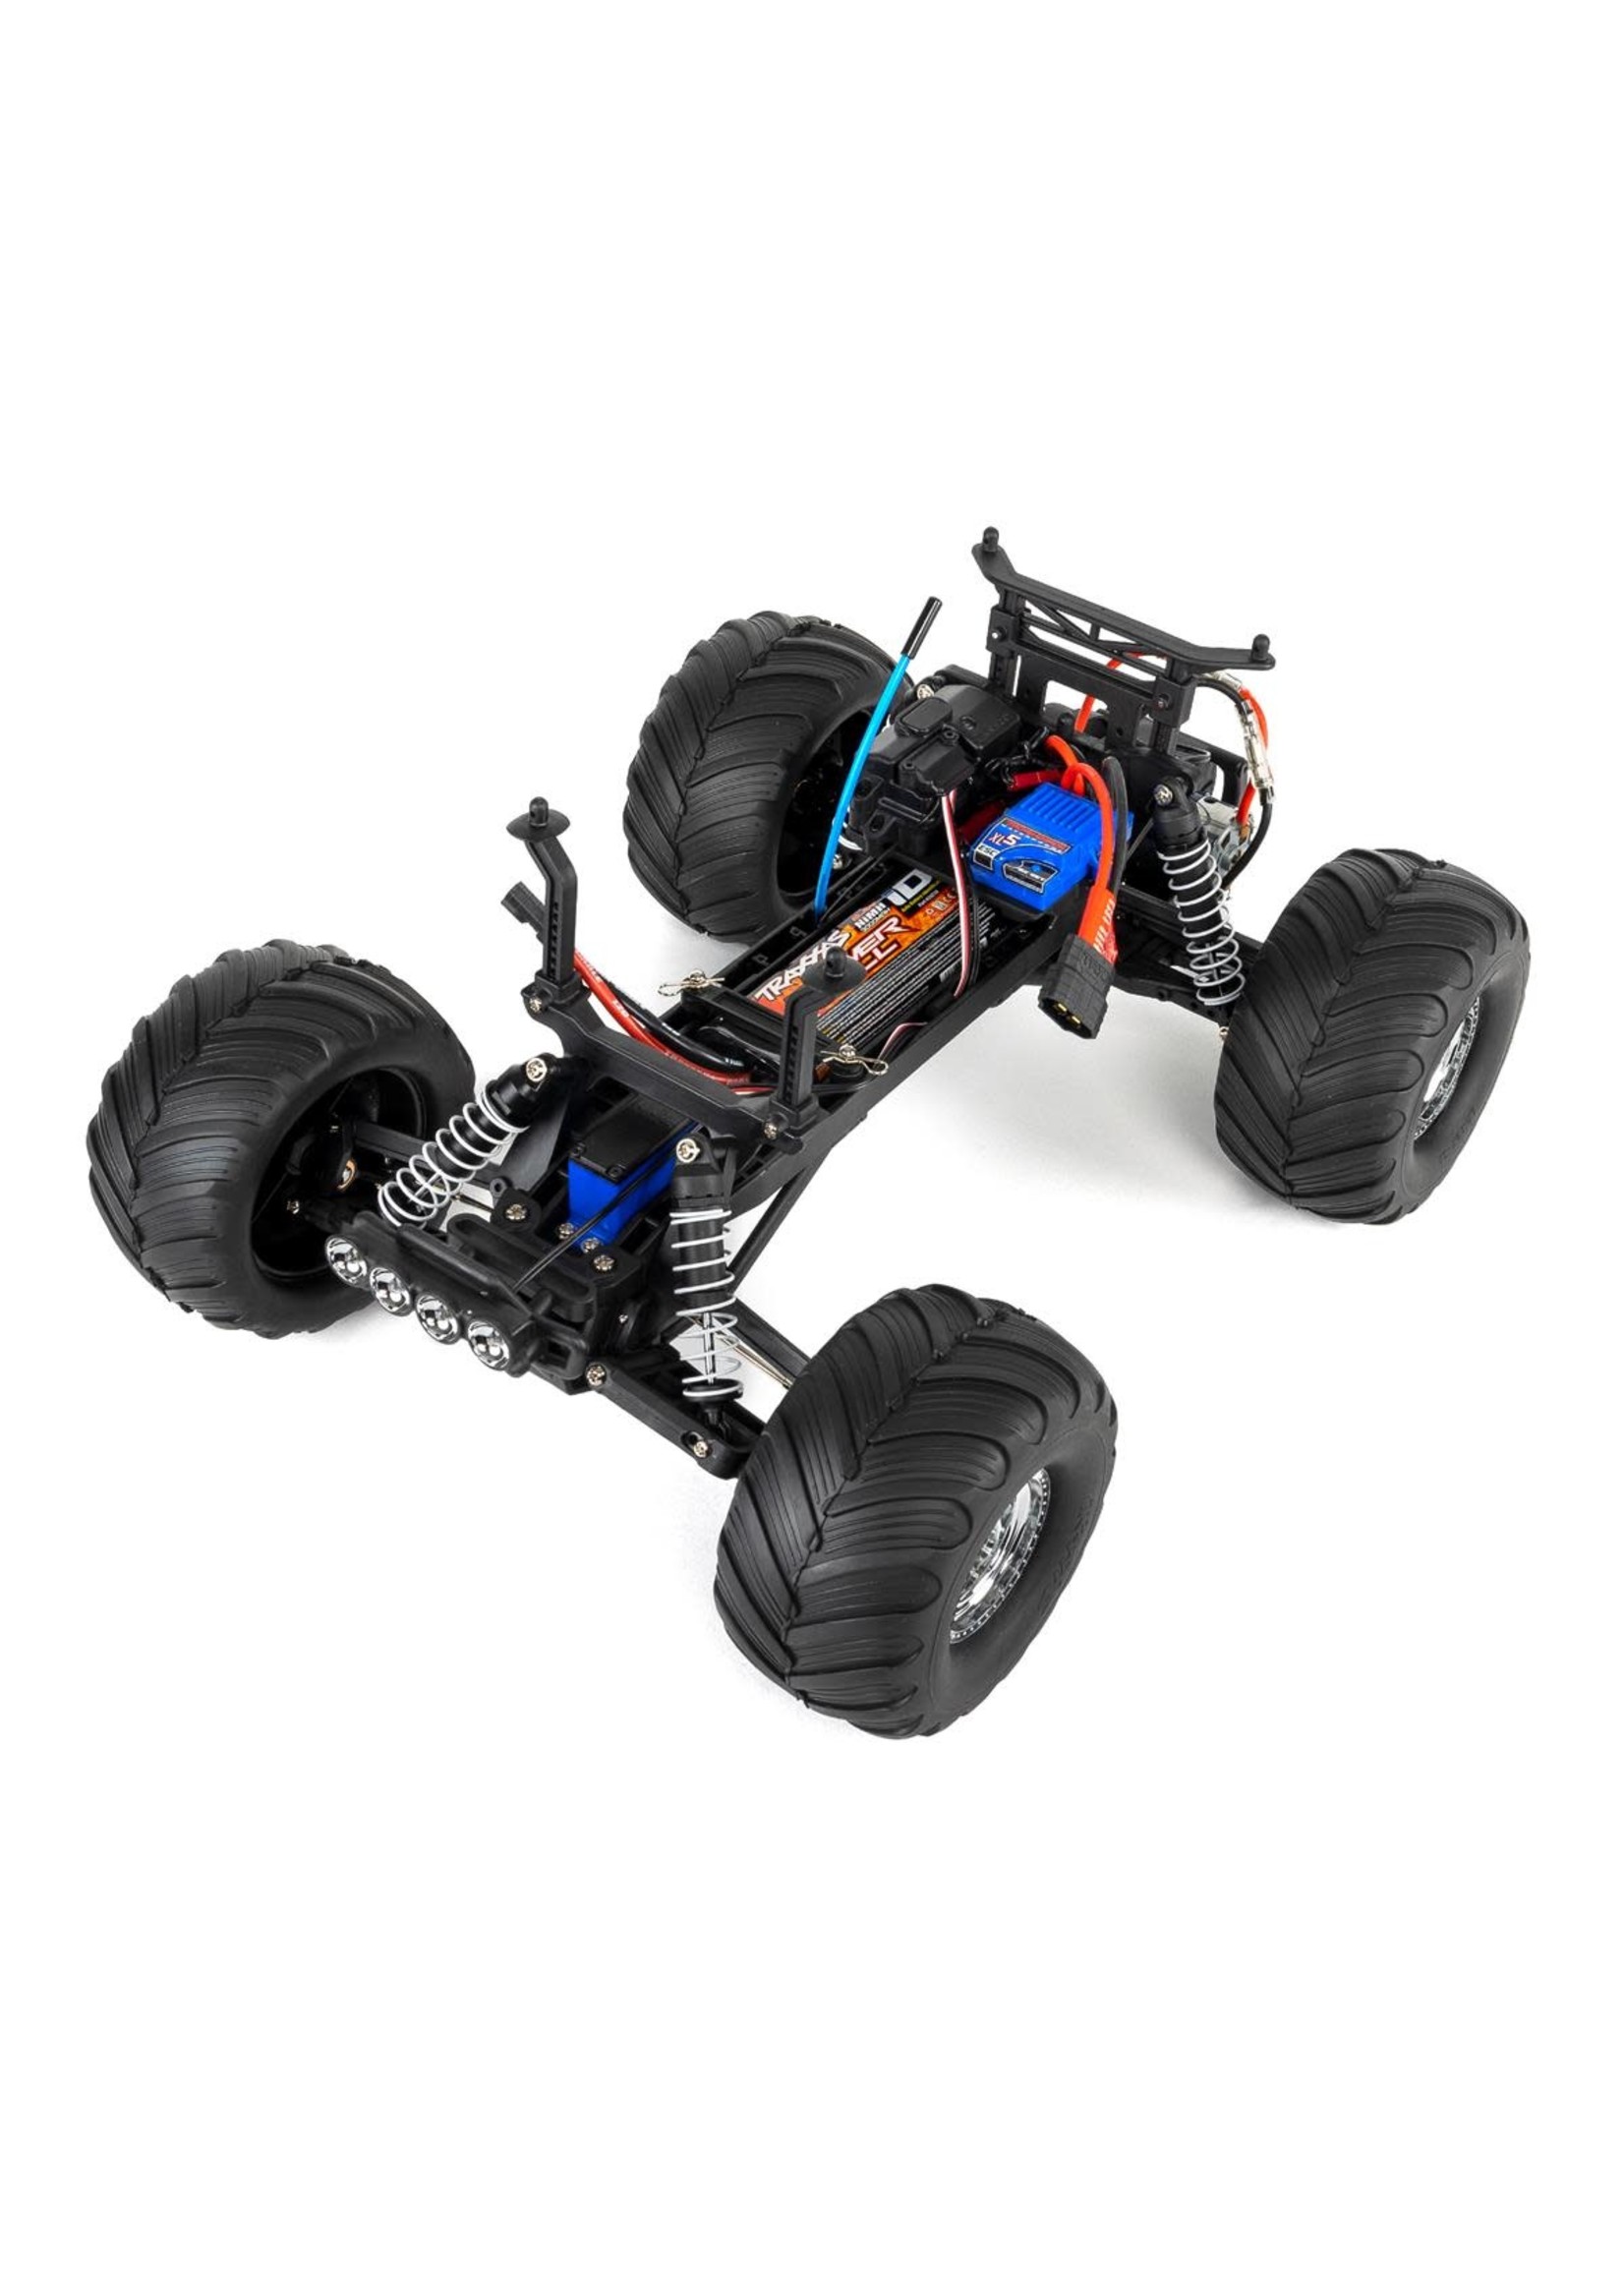 Traxxas 36034-61-R5 Traxxas "Bigfoot" No.1 Original Monster RTR 1/10 2WD Monster Truck w/LED Lights, TQ 2.4GHz Radio, Battery & DC Charger